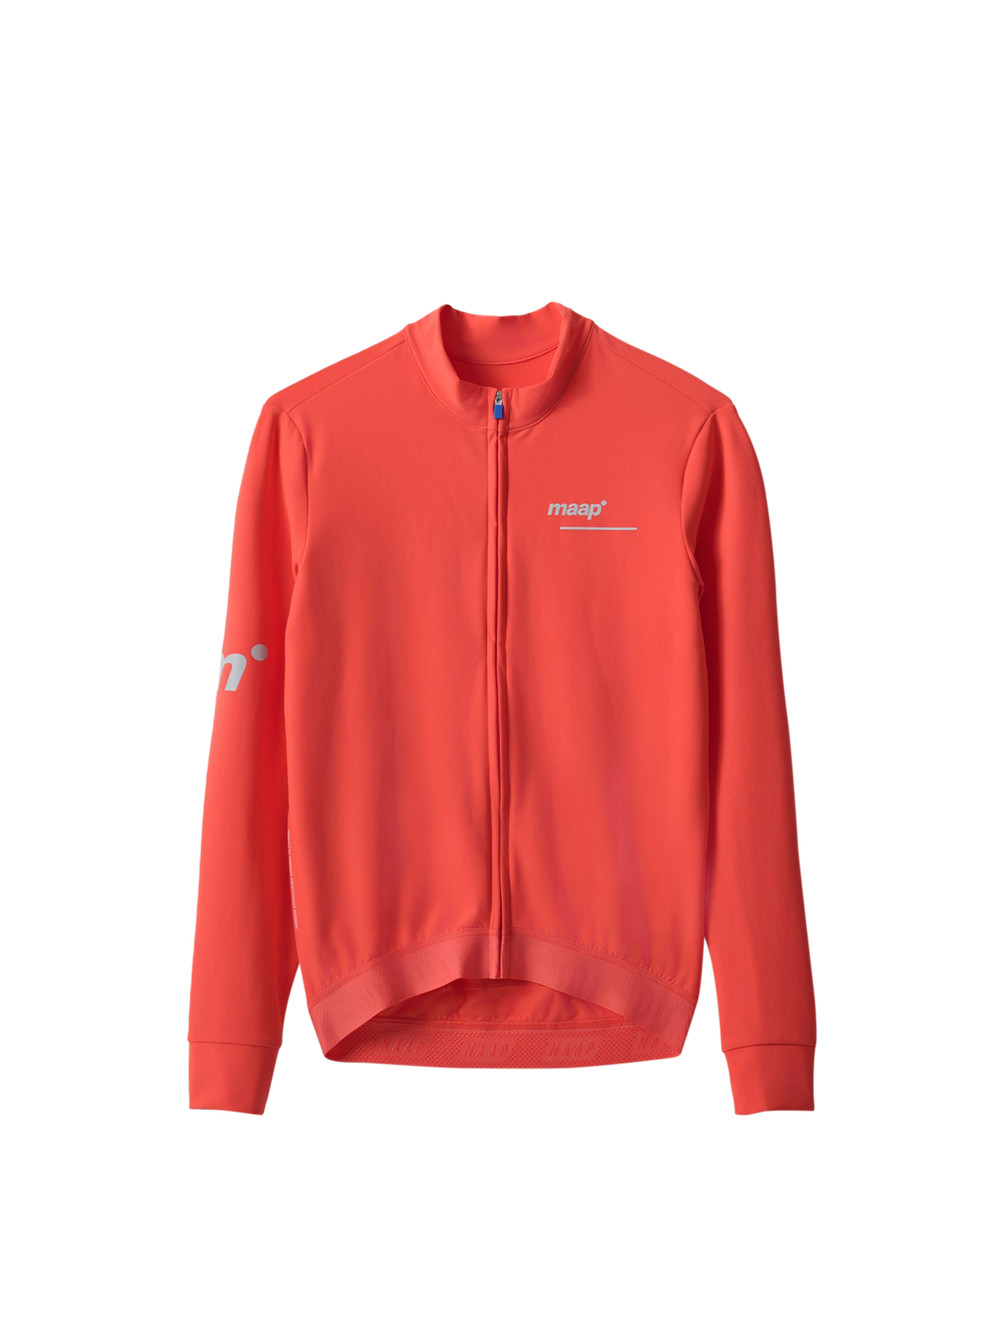 Product Image for Thermal Training LS Jersey